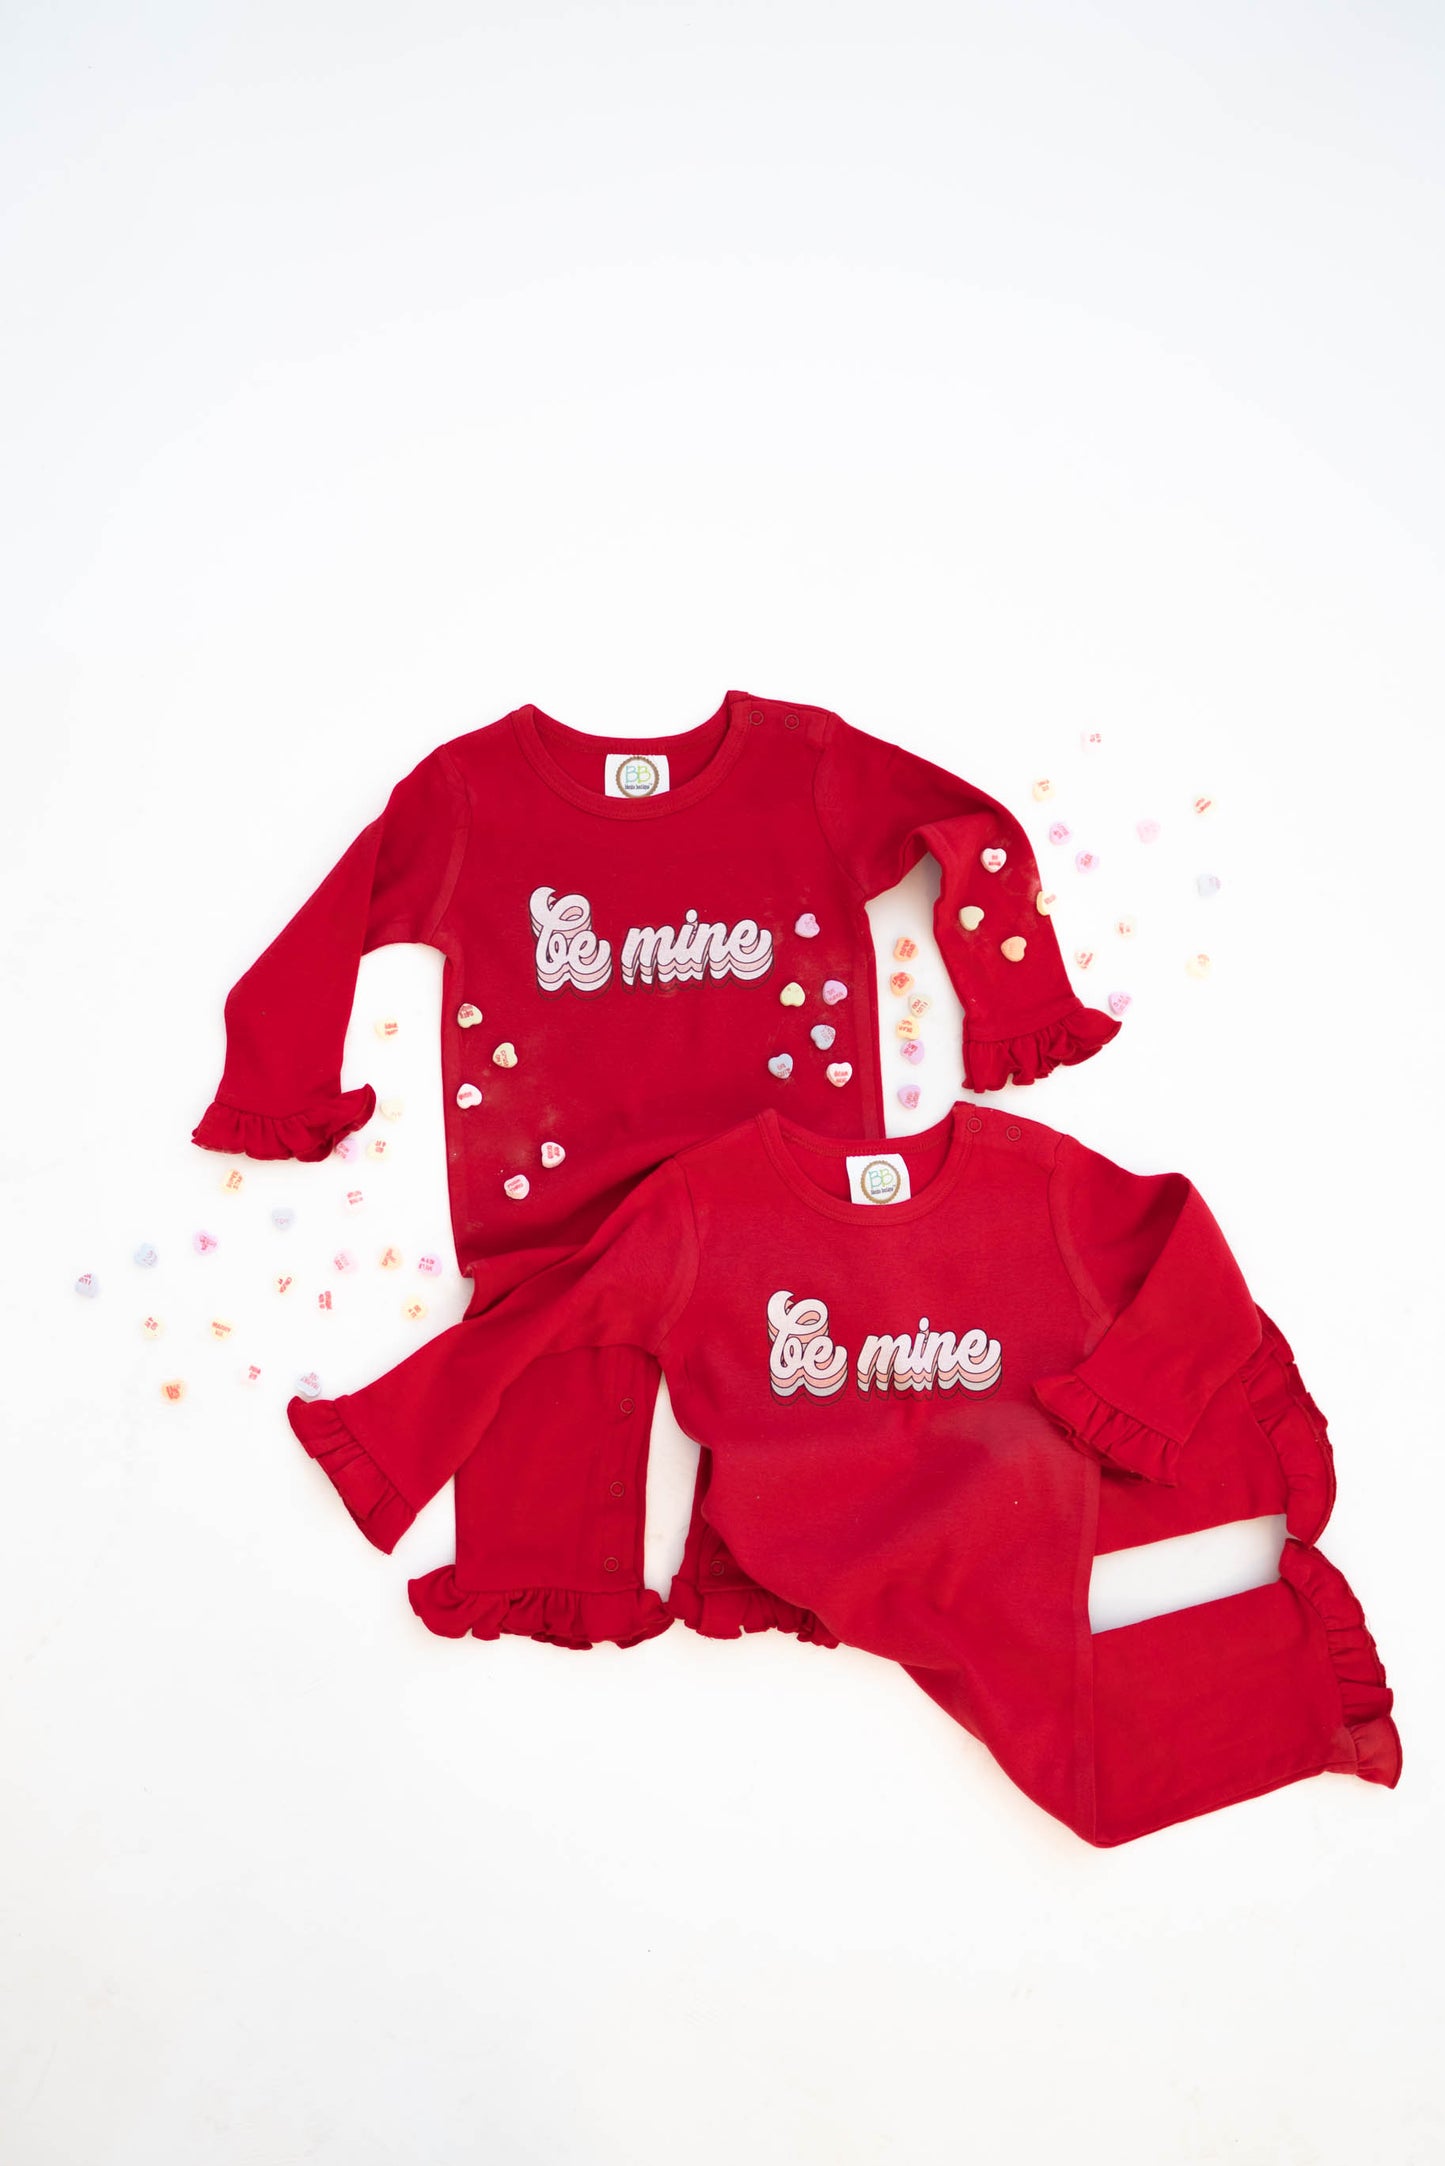 Be Mine | Ruffle Romper | RTS-Sister Shirts-Sister Shirts, Cute & Custom Tees for Mama & Littles in Trussville, Alabama.